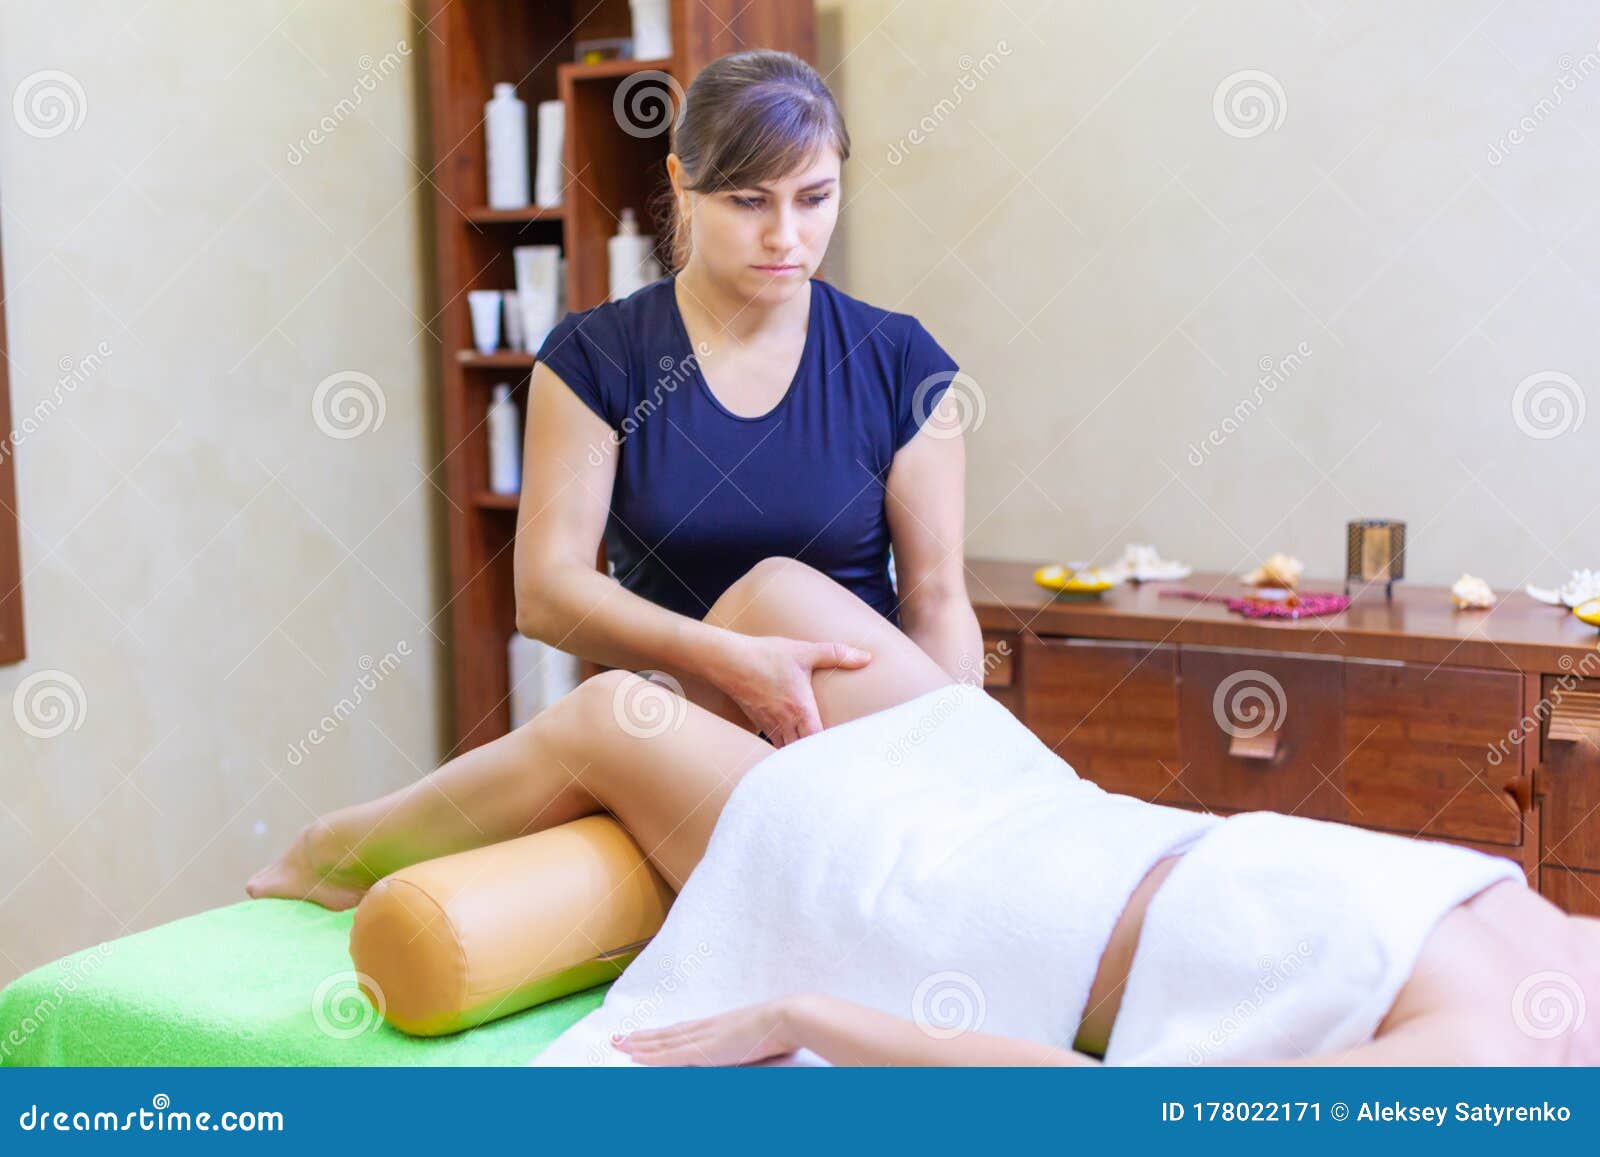 Front View Of Professional Massage Therapist Giving